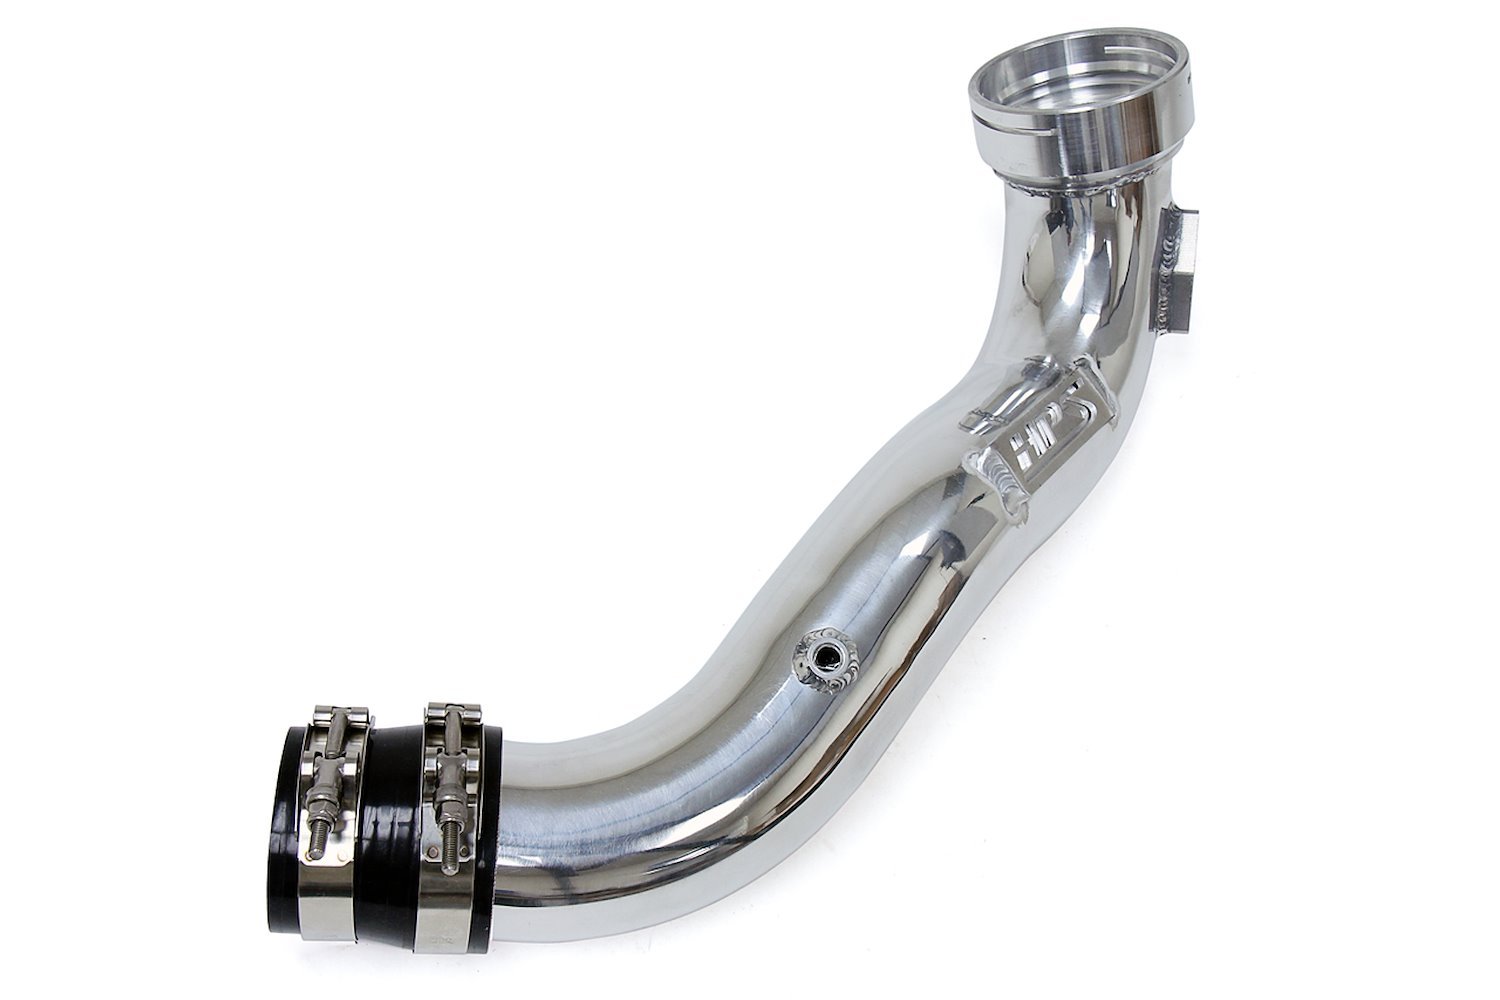 17-107P Turbo Charge Pipe Kit, 3 in. Aluminum Cold Side Charge Pipe, High-Temp Reinforced Silicone Turbo Boots